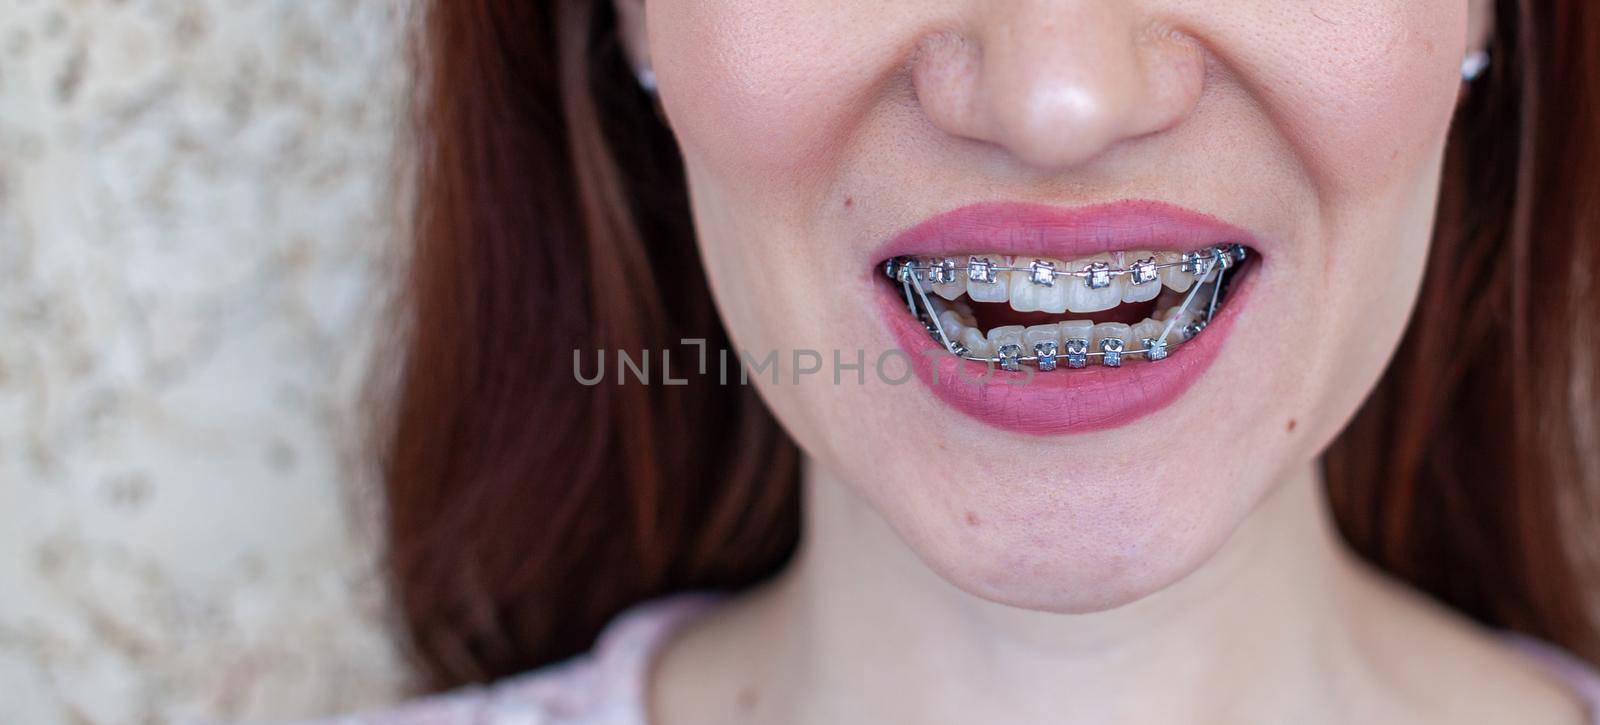 Brasket system in a girl's smiling mouth, macro photography of teeth. large face and painted lips. Braces on the teeth of a girl who smiles.